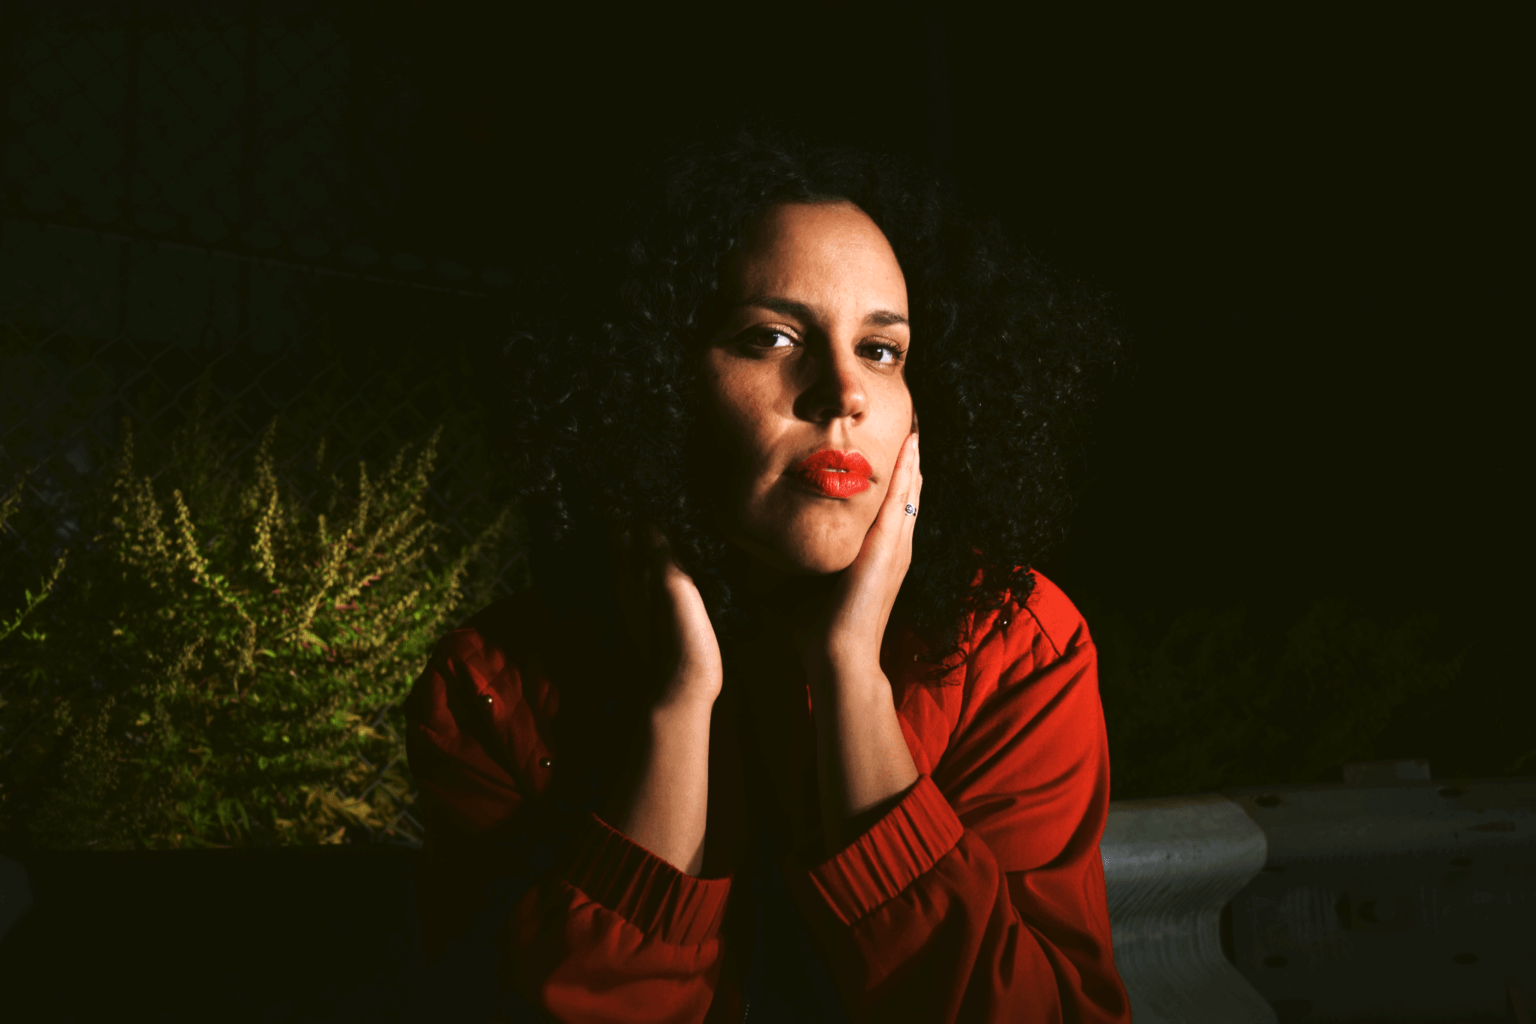 NYC singer/songwriter Xenia Rubinos has released her new LP Una Rosa, out today via ANTI-Records. Described as a a cinematic obra